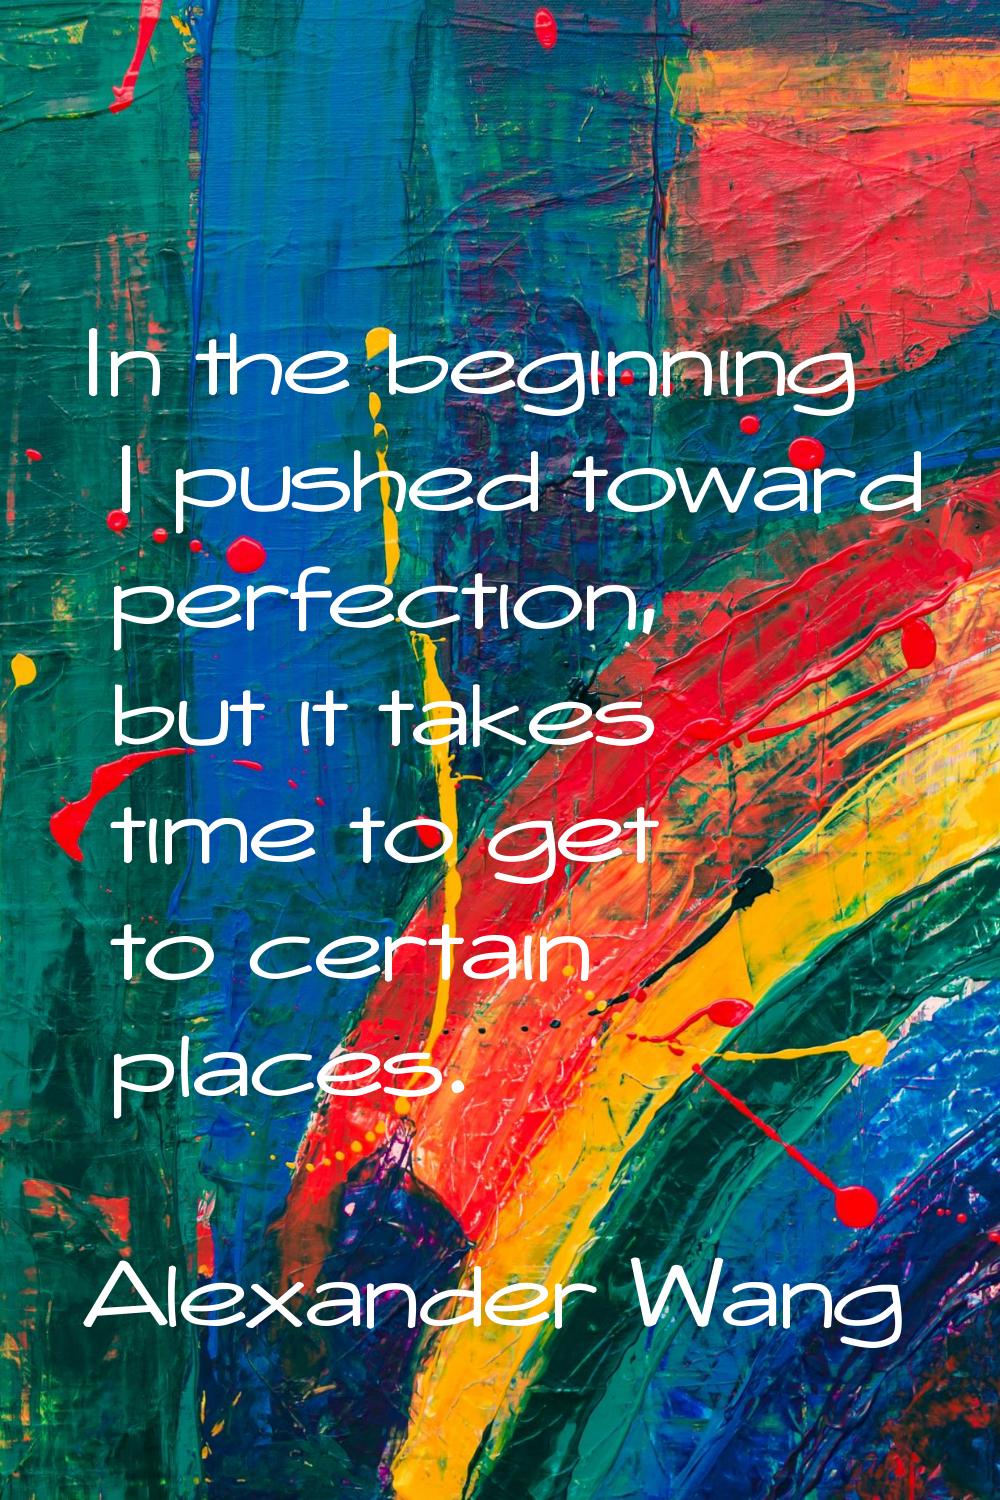 In the beginning I pushed toward perfection, but it takes time to get to certain places.